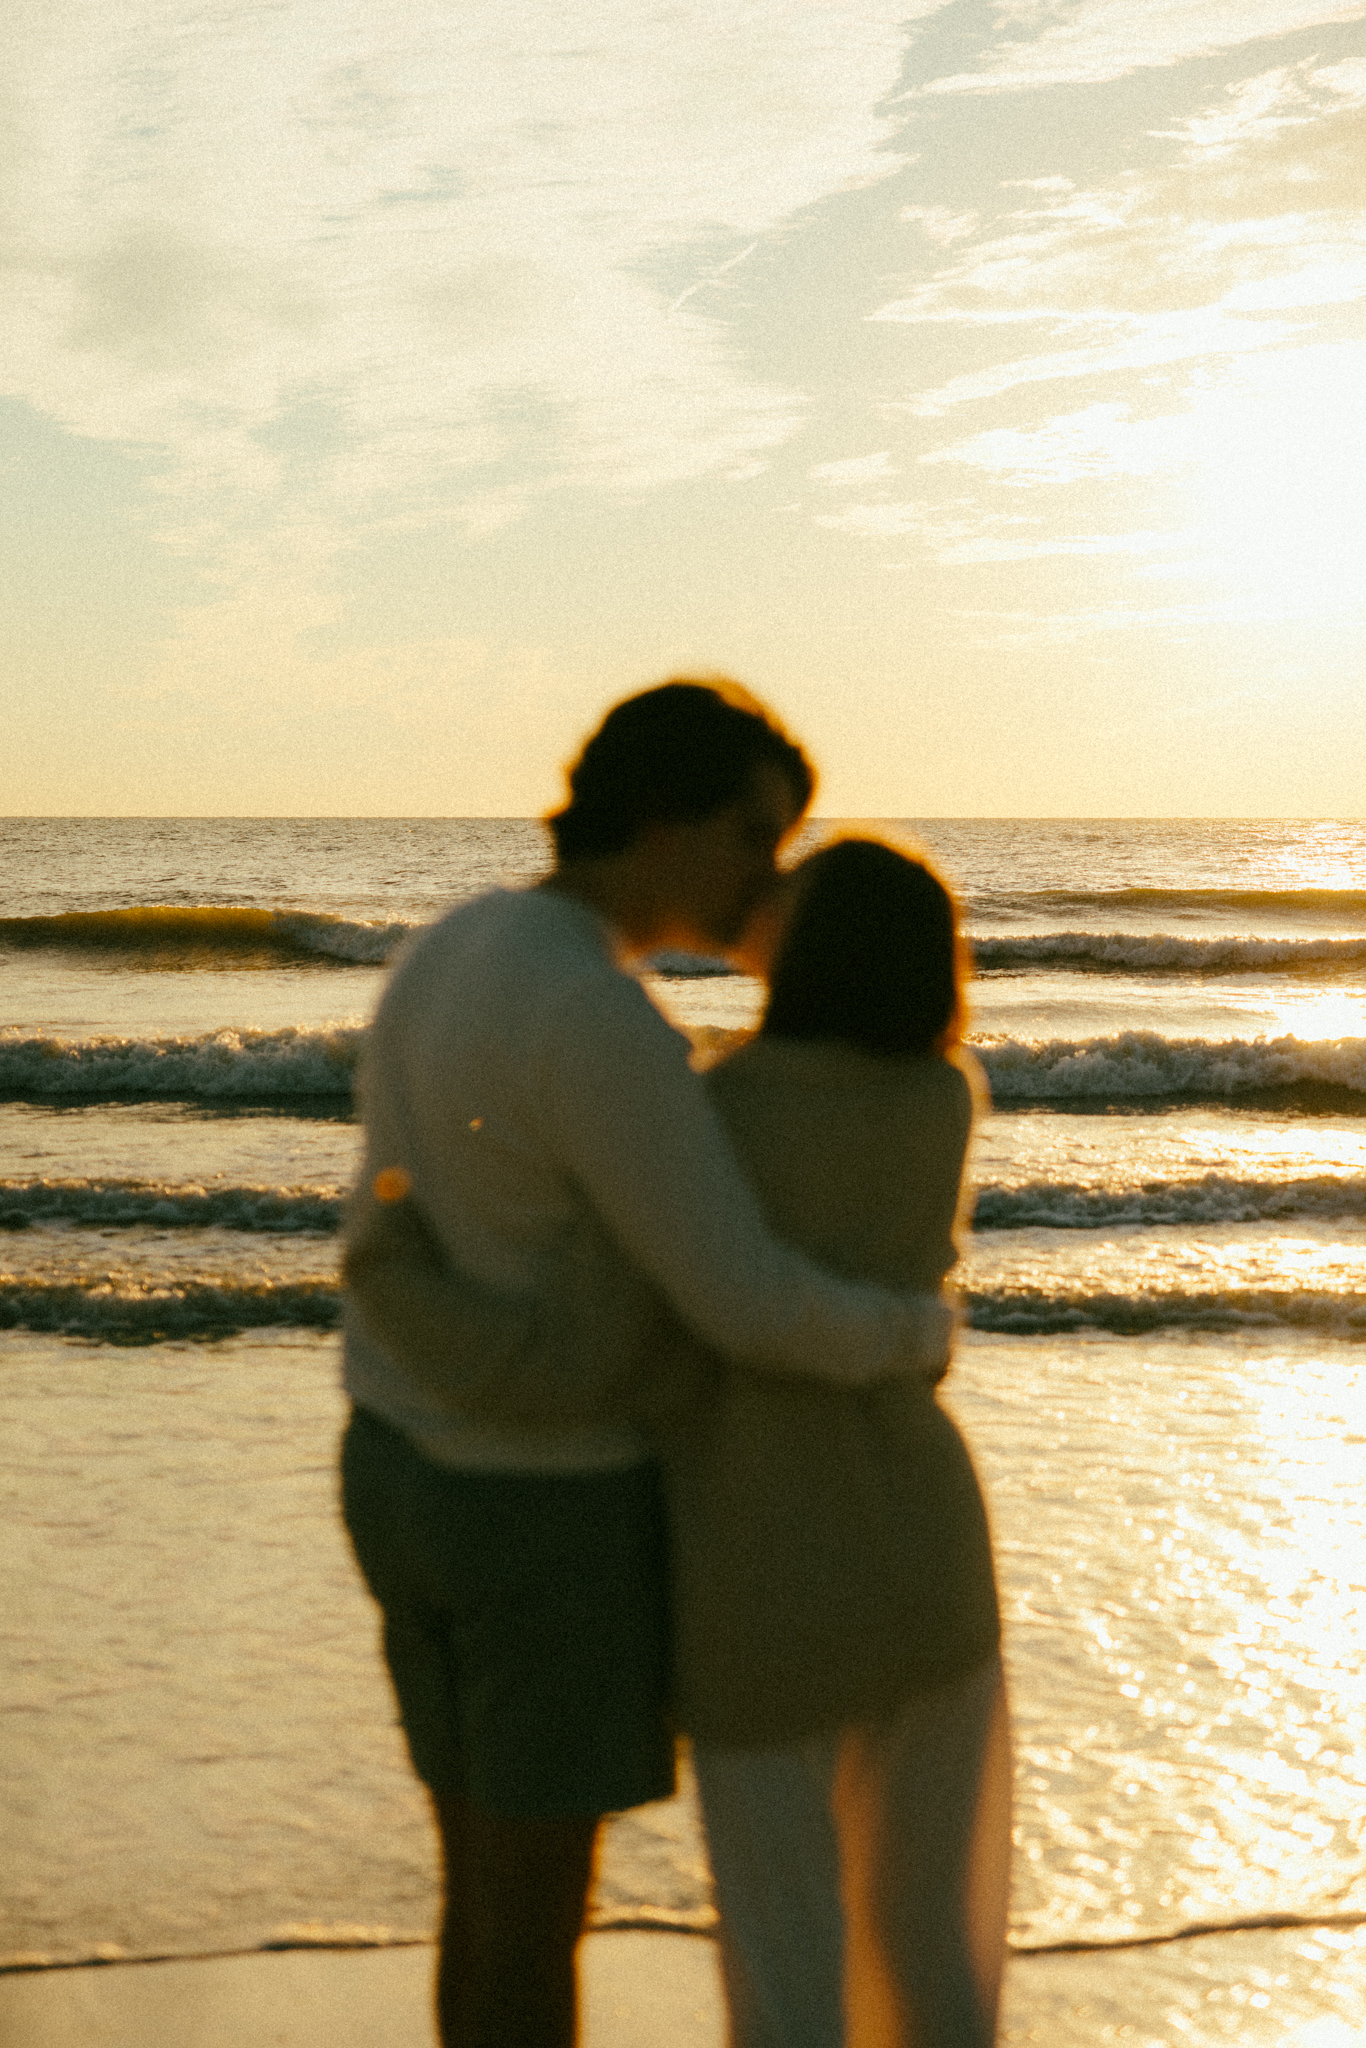 Documentary style photo of couple kissing with the camera focused on the waves behind them at sunset.